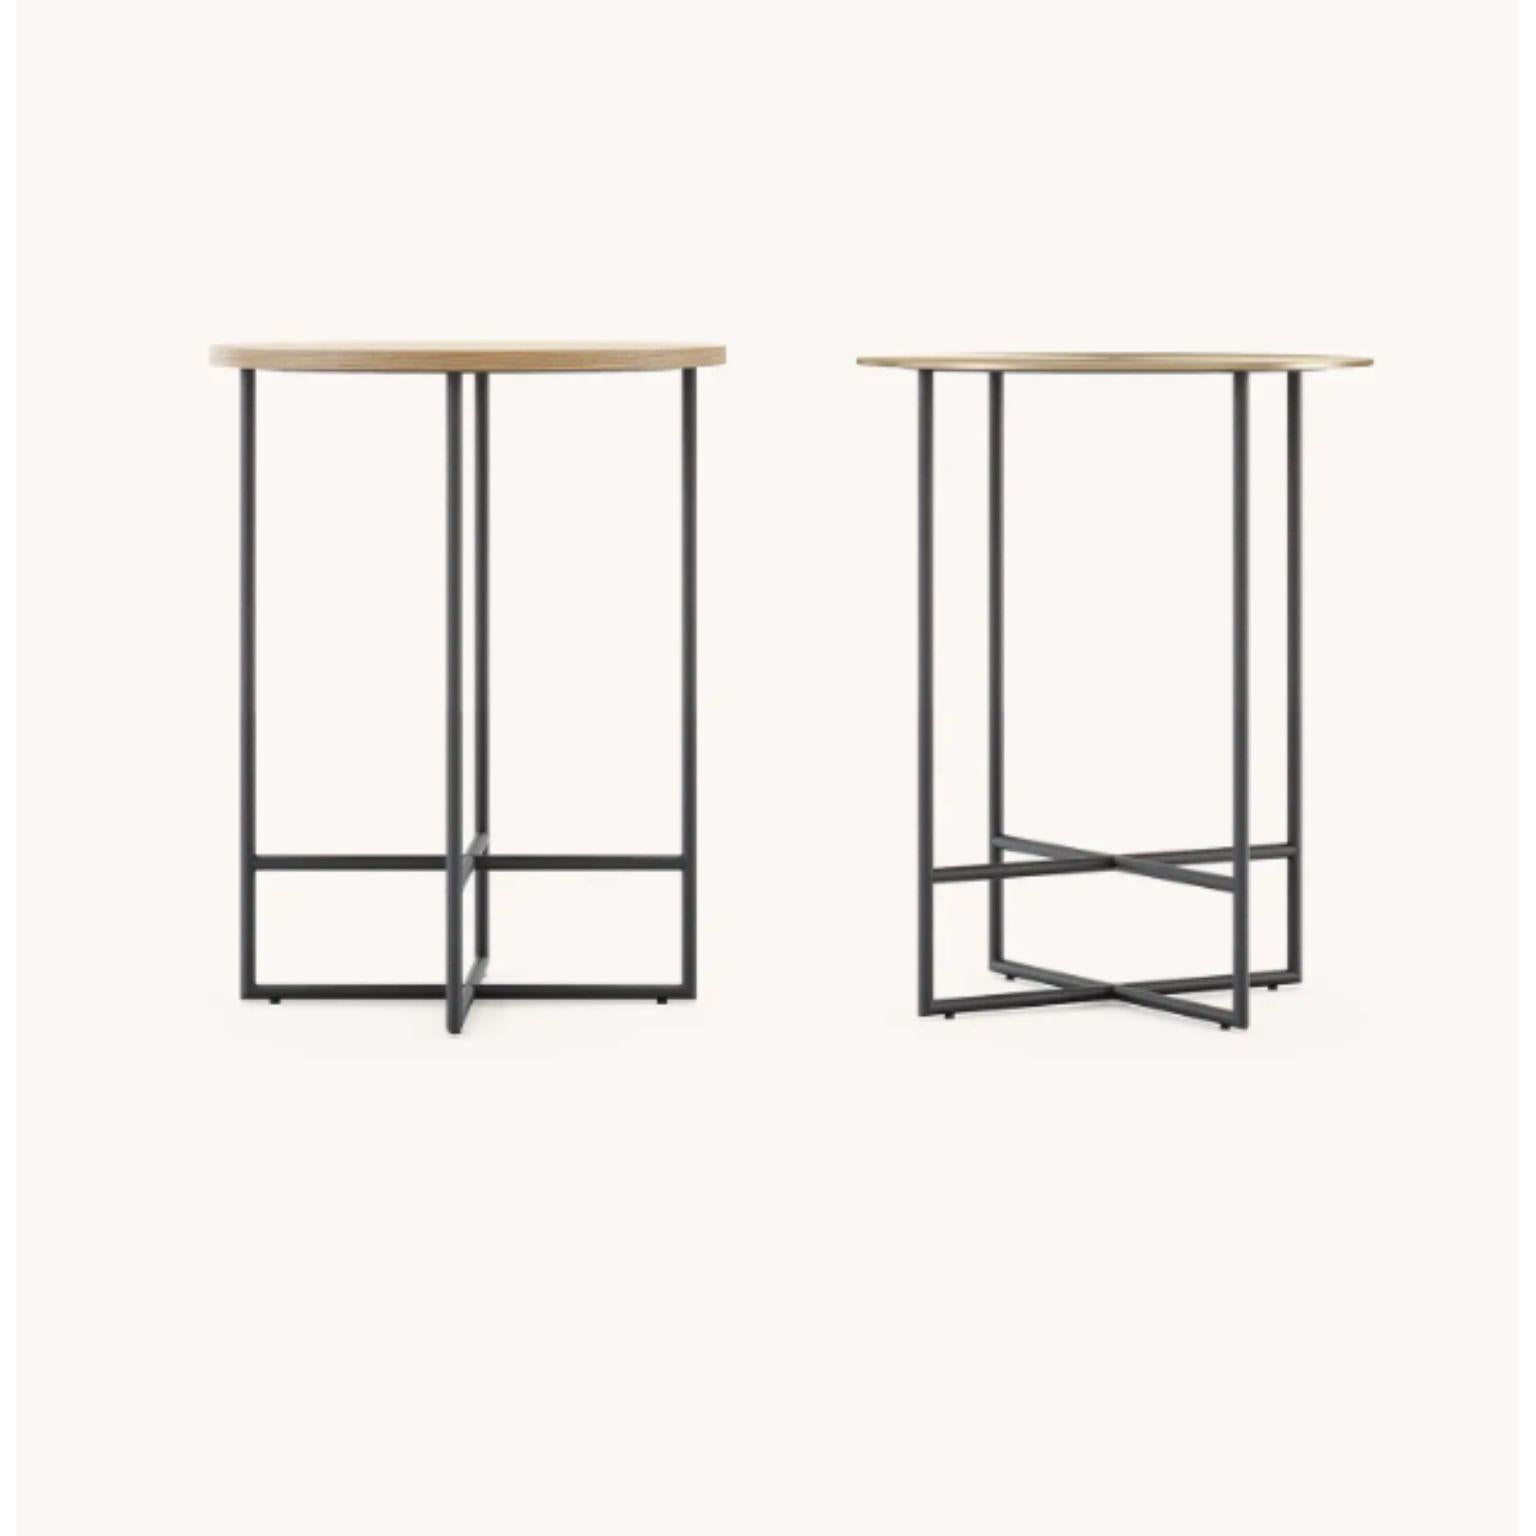 Tall inside side table with wooden top by Domkapa
Dimensions: W 40 x D 40 x H 51.1 cm.
Materials: Black texturized steel, natural oak matte.
Also available in different materials.

Inside table set includes different versions to fulfill all of